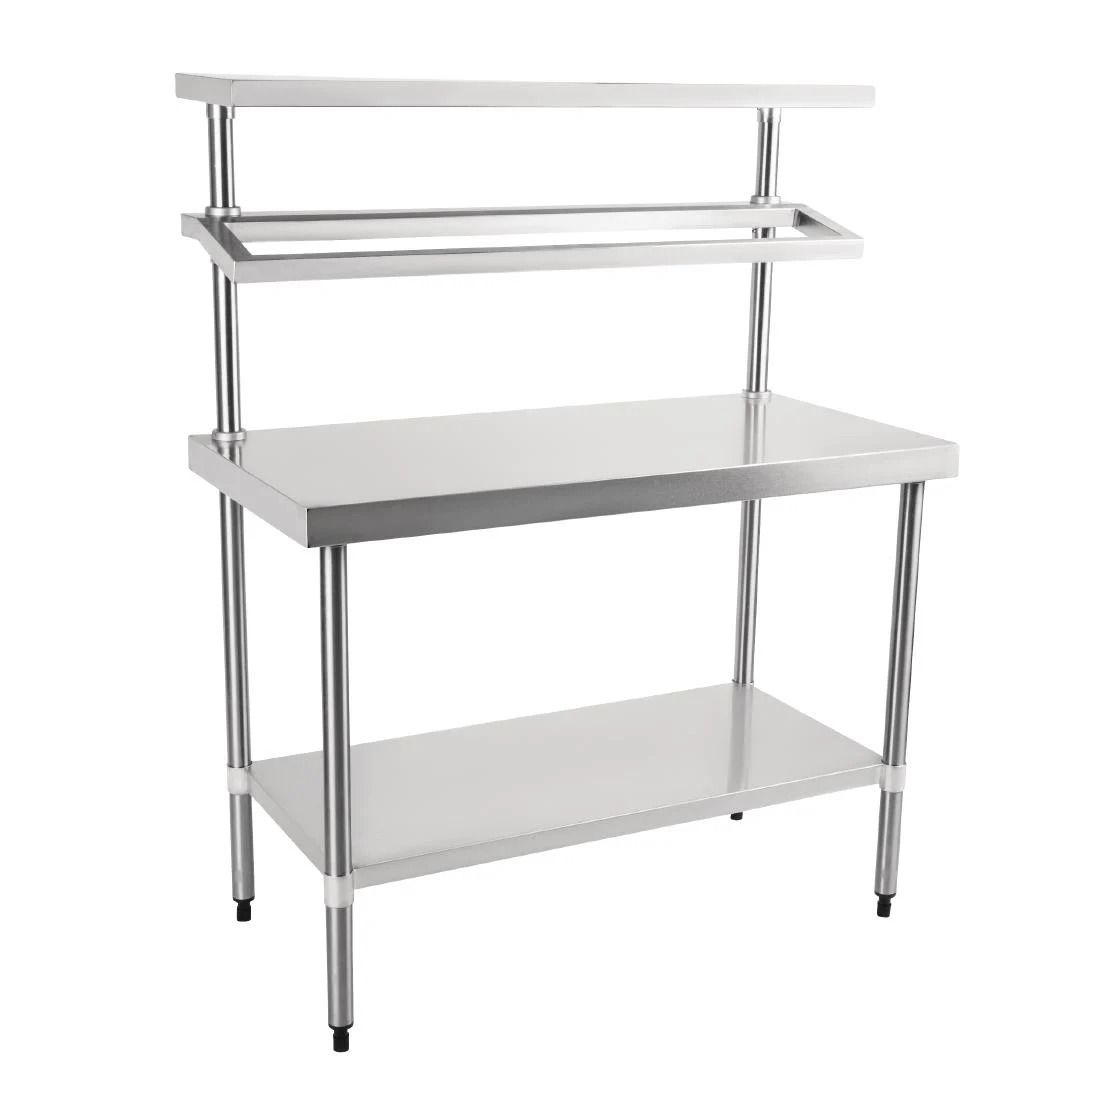 1800mm Wide Stainless Steel Prep Table With Top Shelf – RCB909